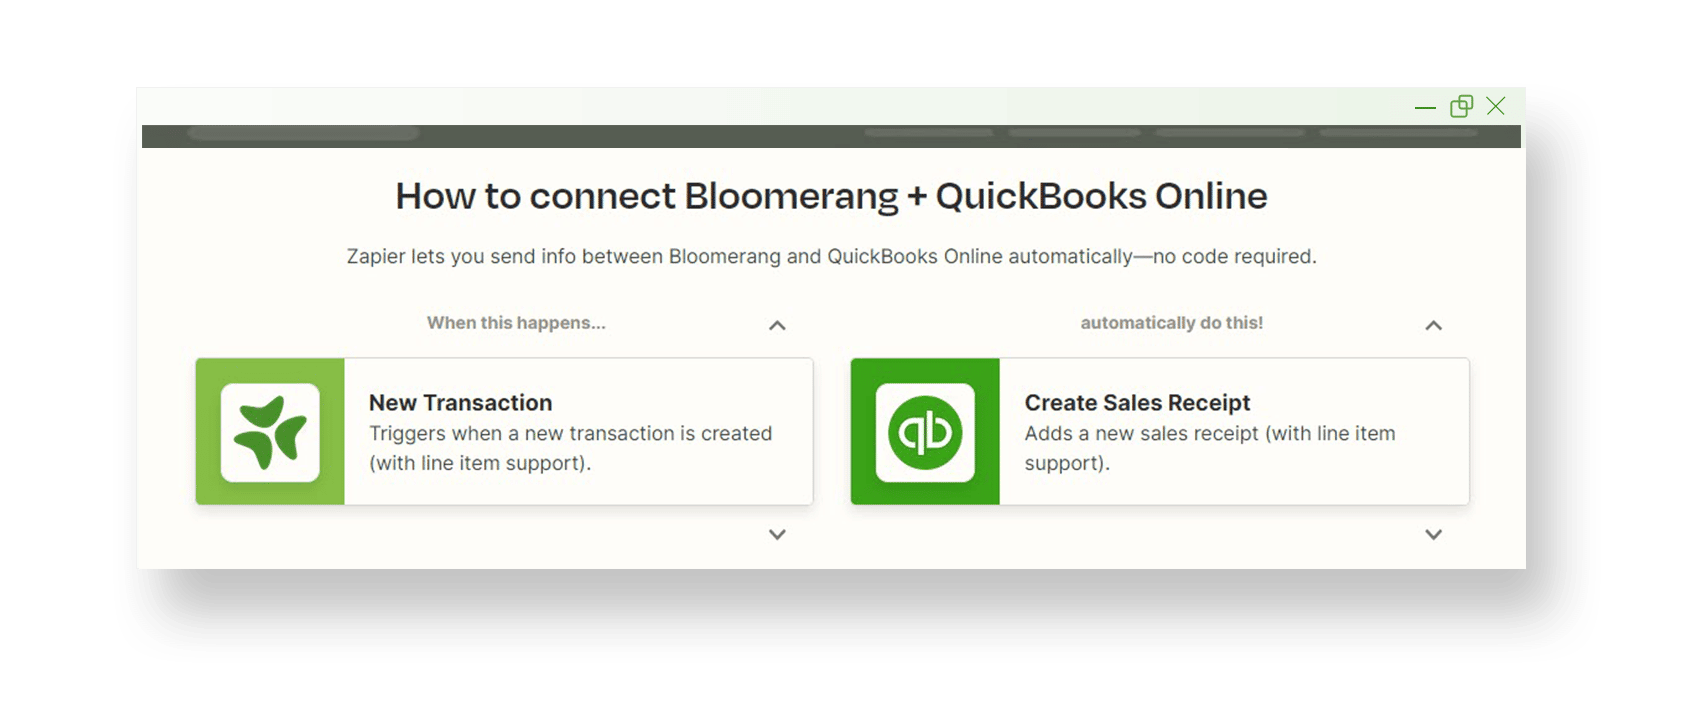 A window is shown using Zapier's software where Bloomerang and Quickbooks Online are connected through a 